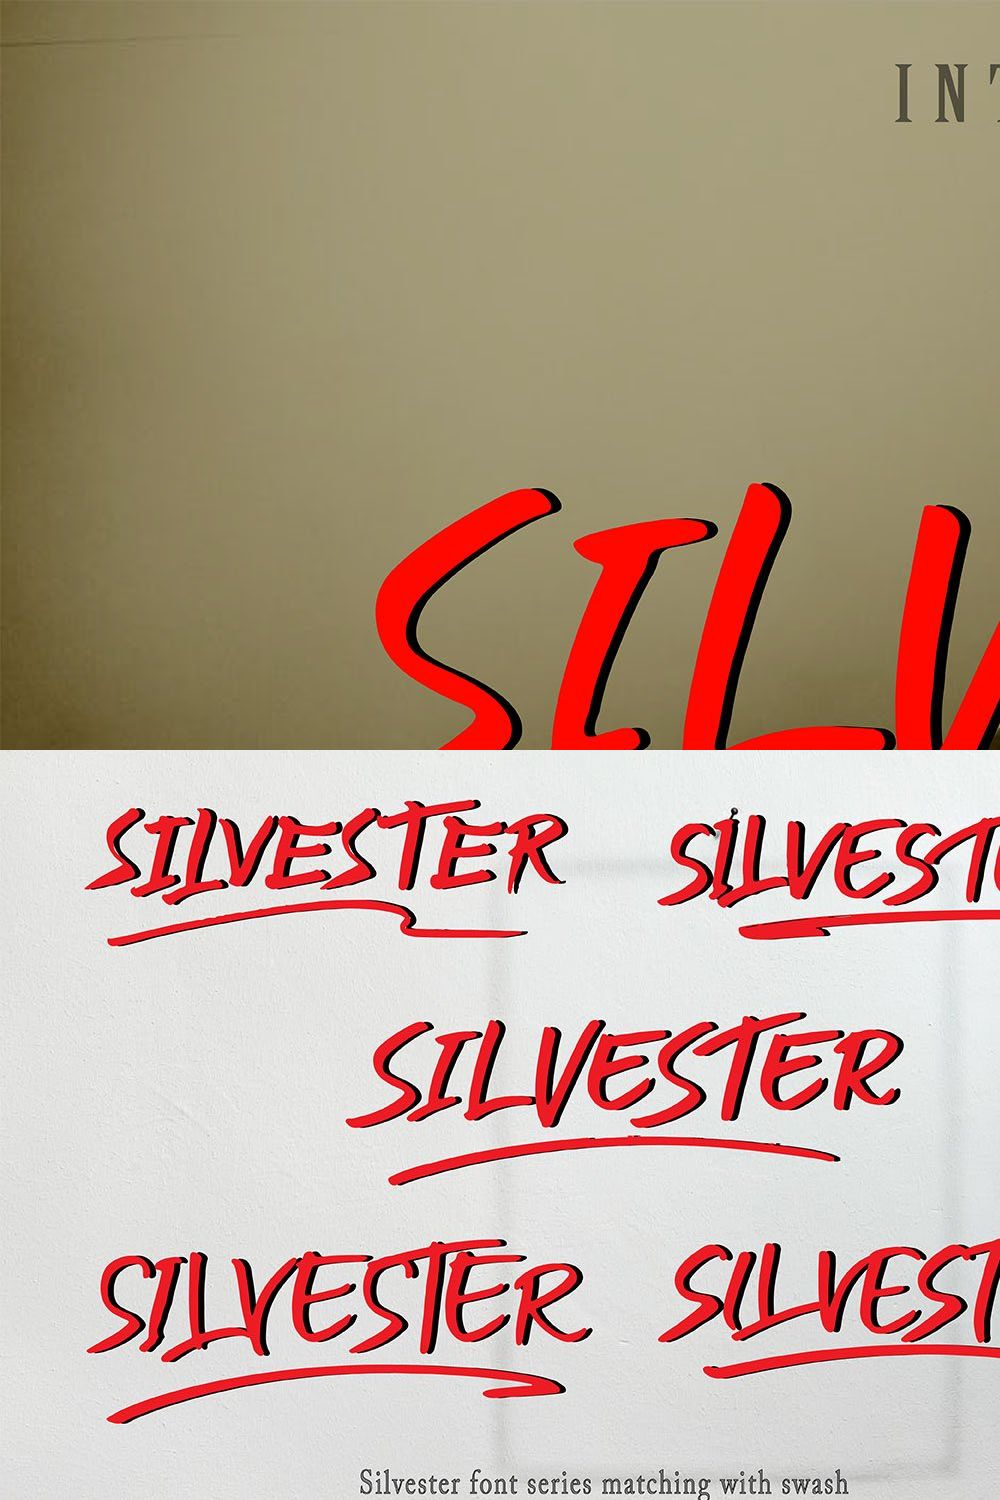 Silvester pinterest preview image.